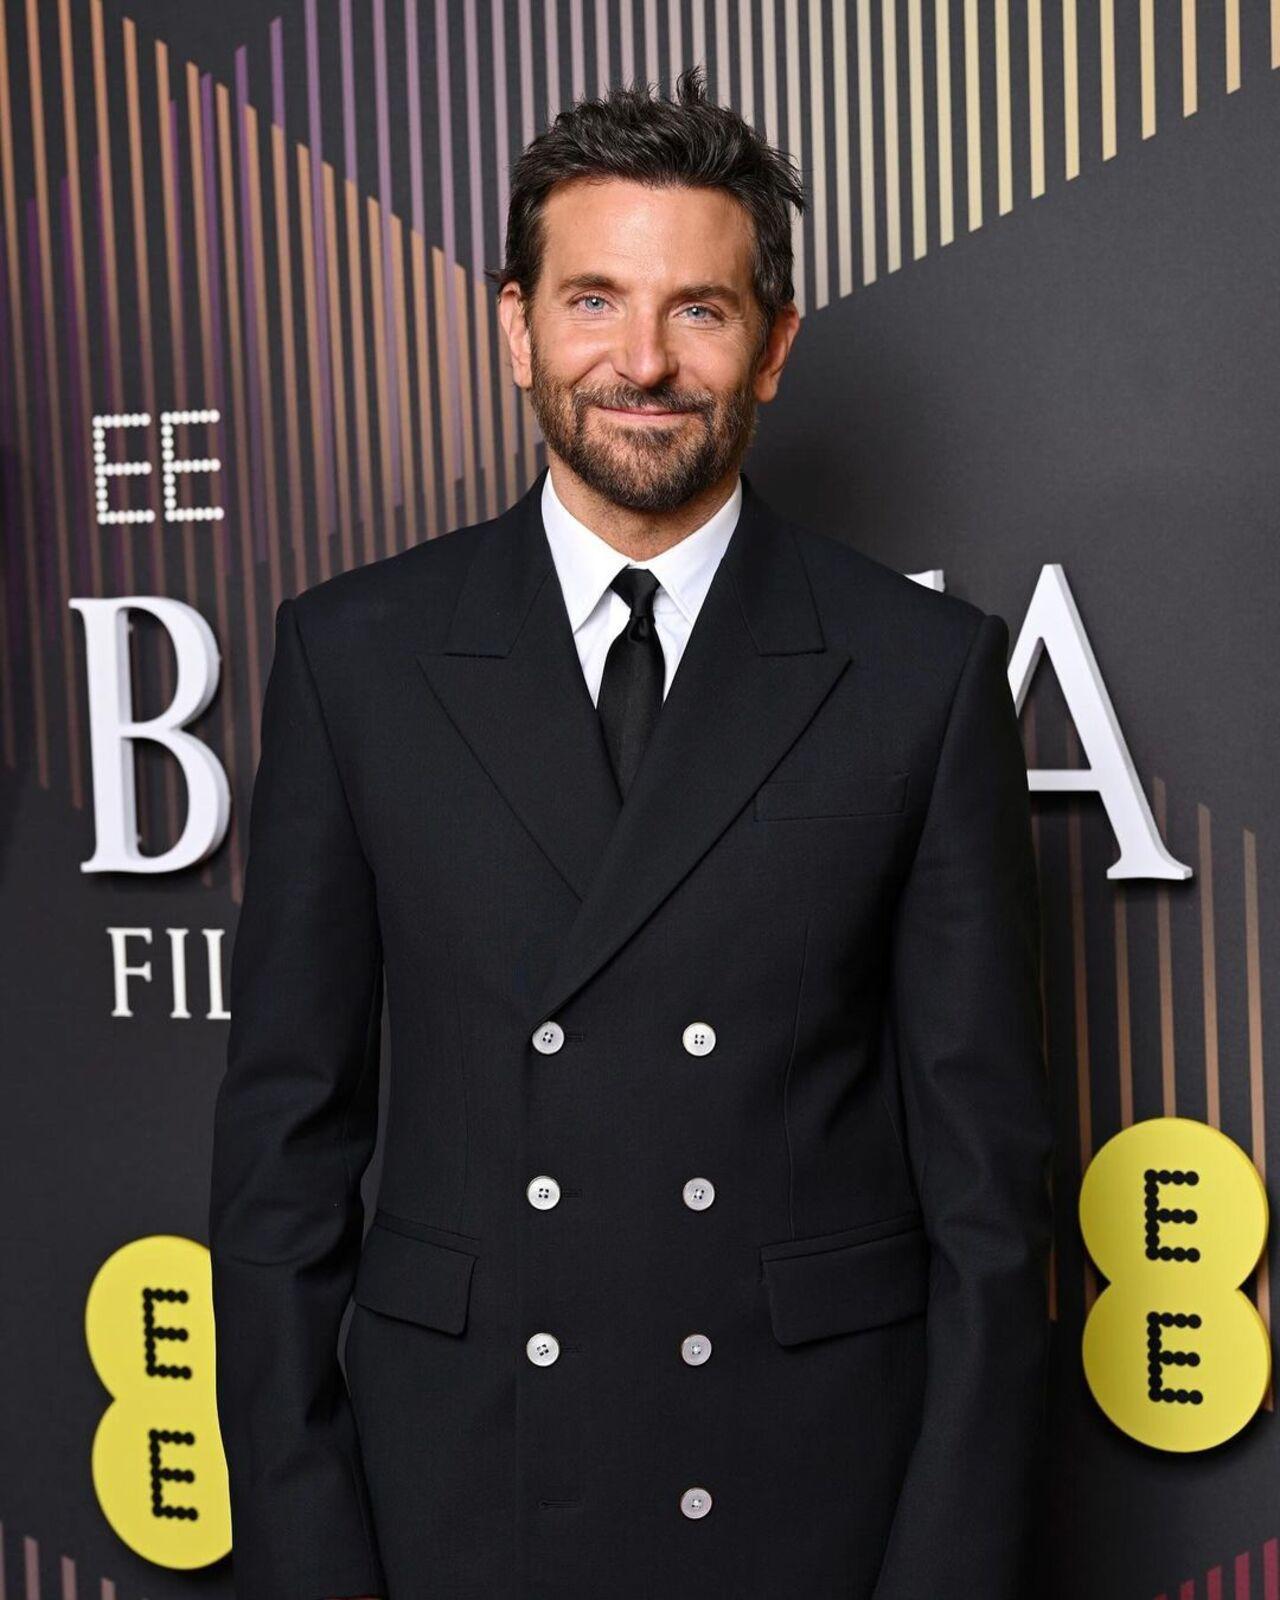 Bradley Cooper looked dapper in an all-black outfit